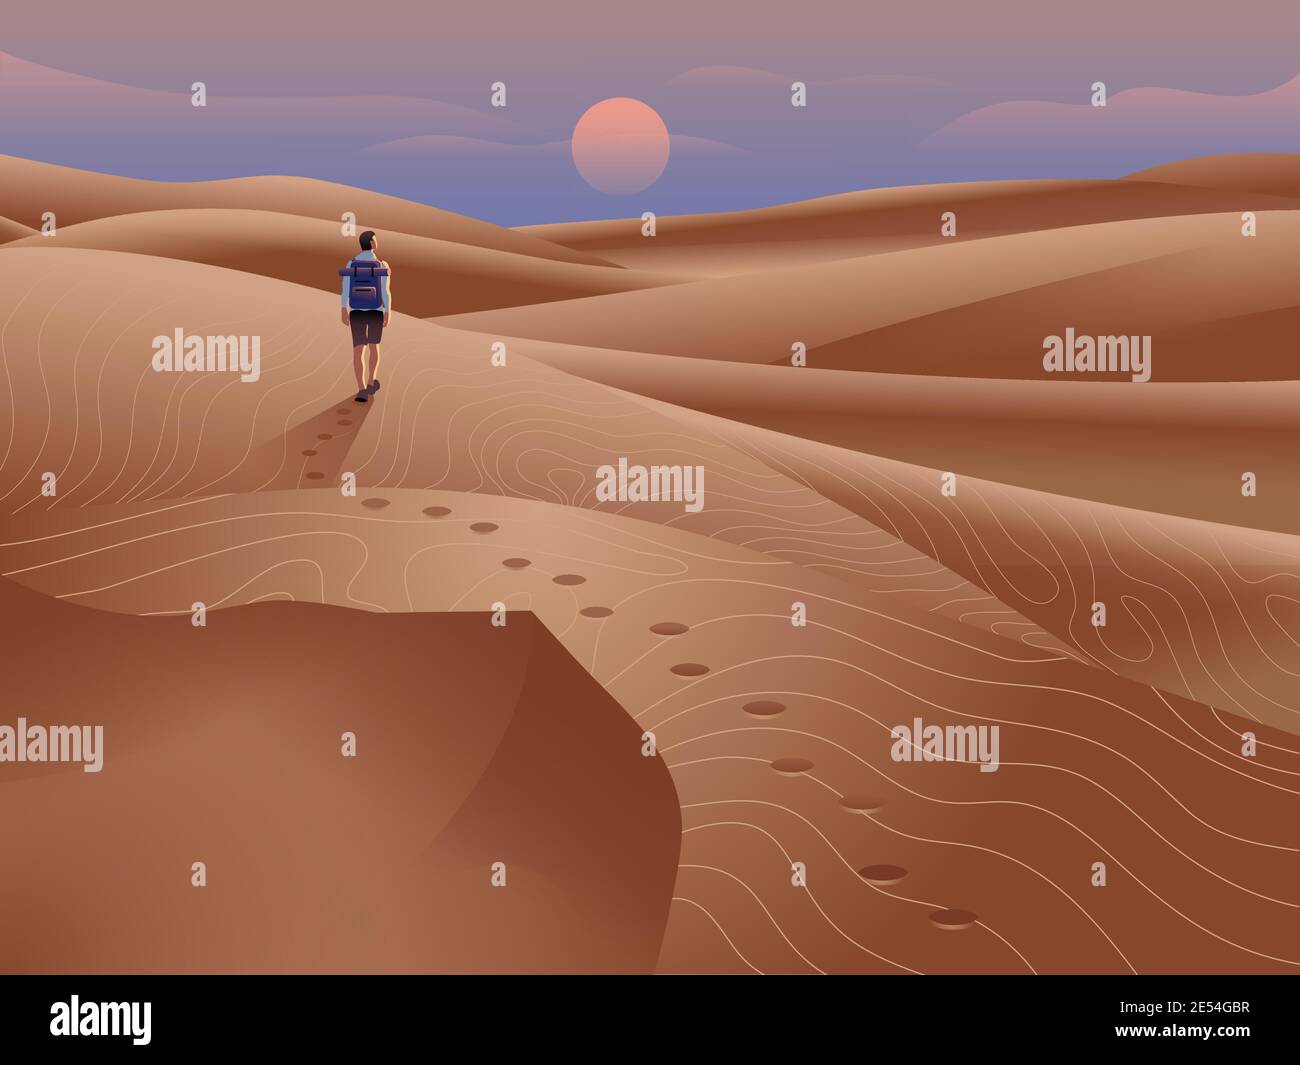 Tourist in the desert illustration. Landscape of sand dunes with evening sky and sun at the horizon. Man traveling with a backpack alone. Stock Vector